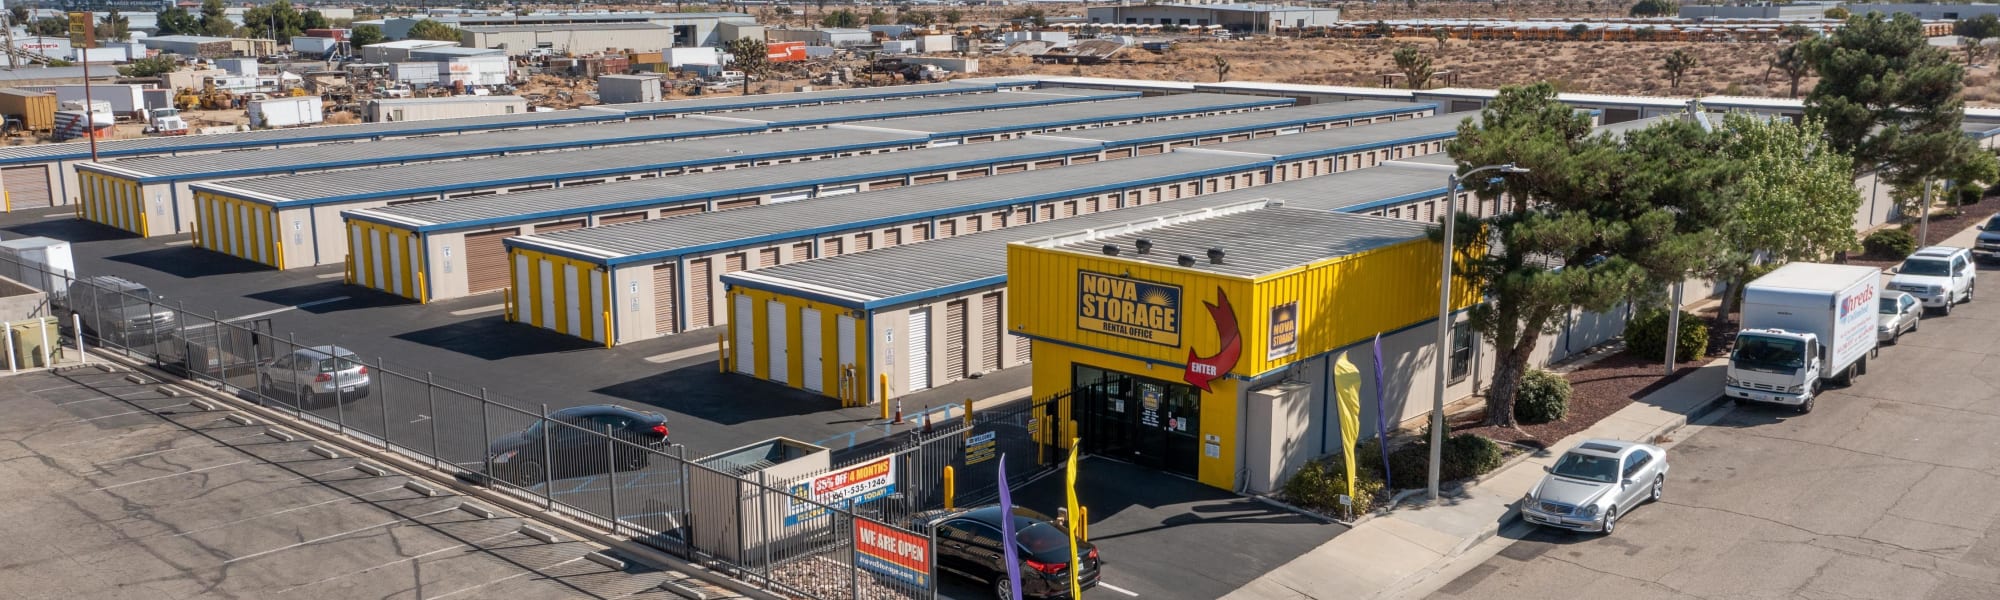 Find and rent a storage unit from Nova Storage in Lancaster, California